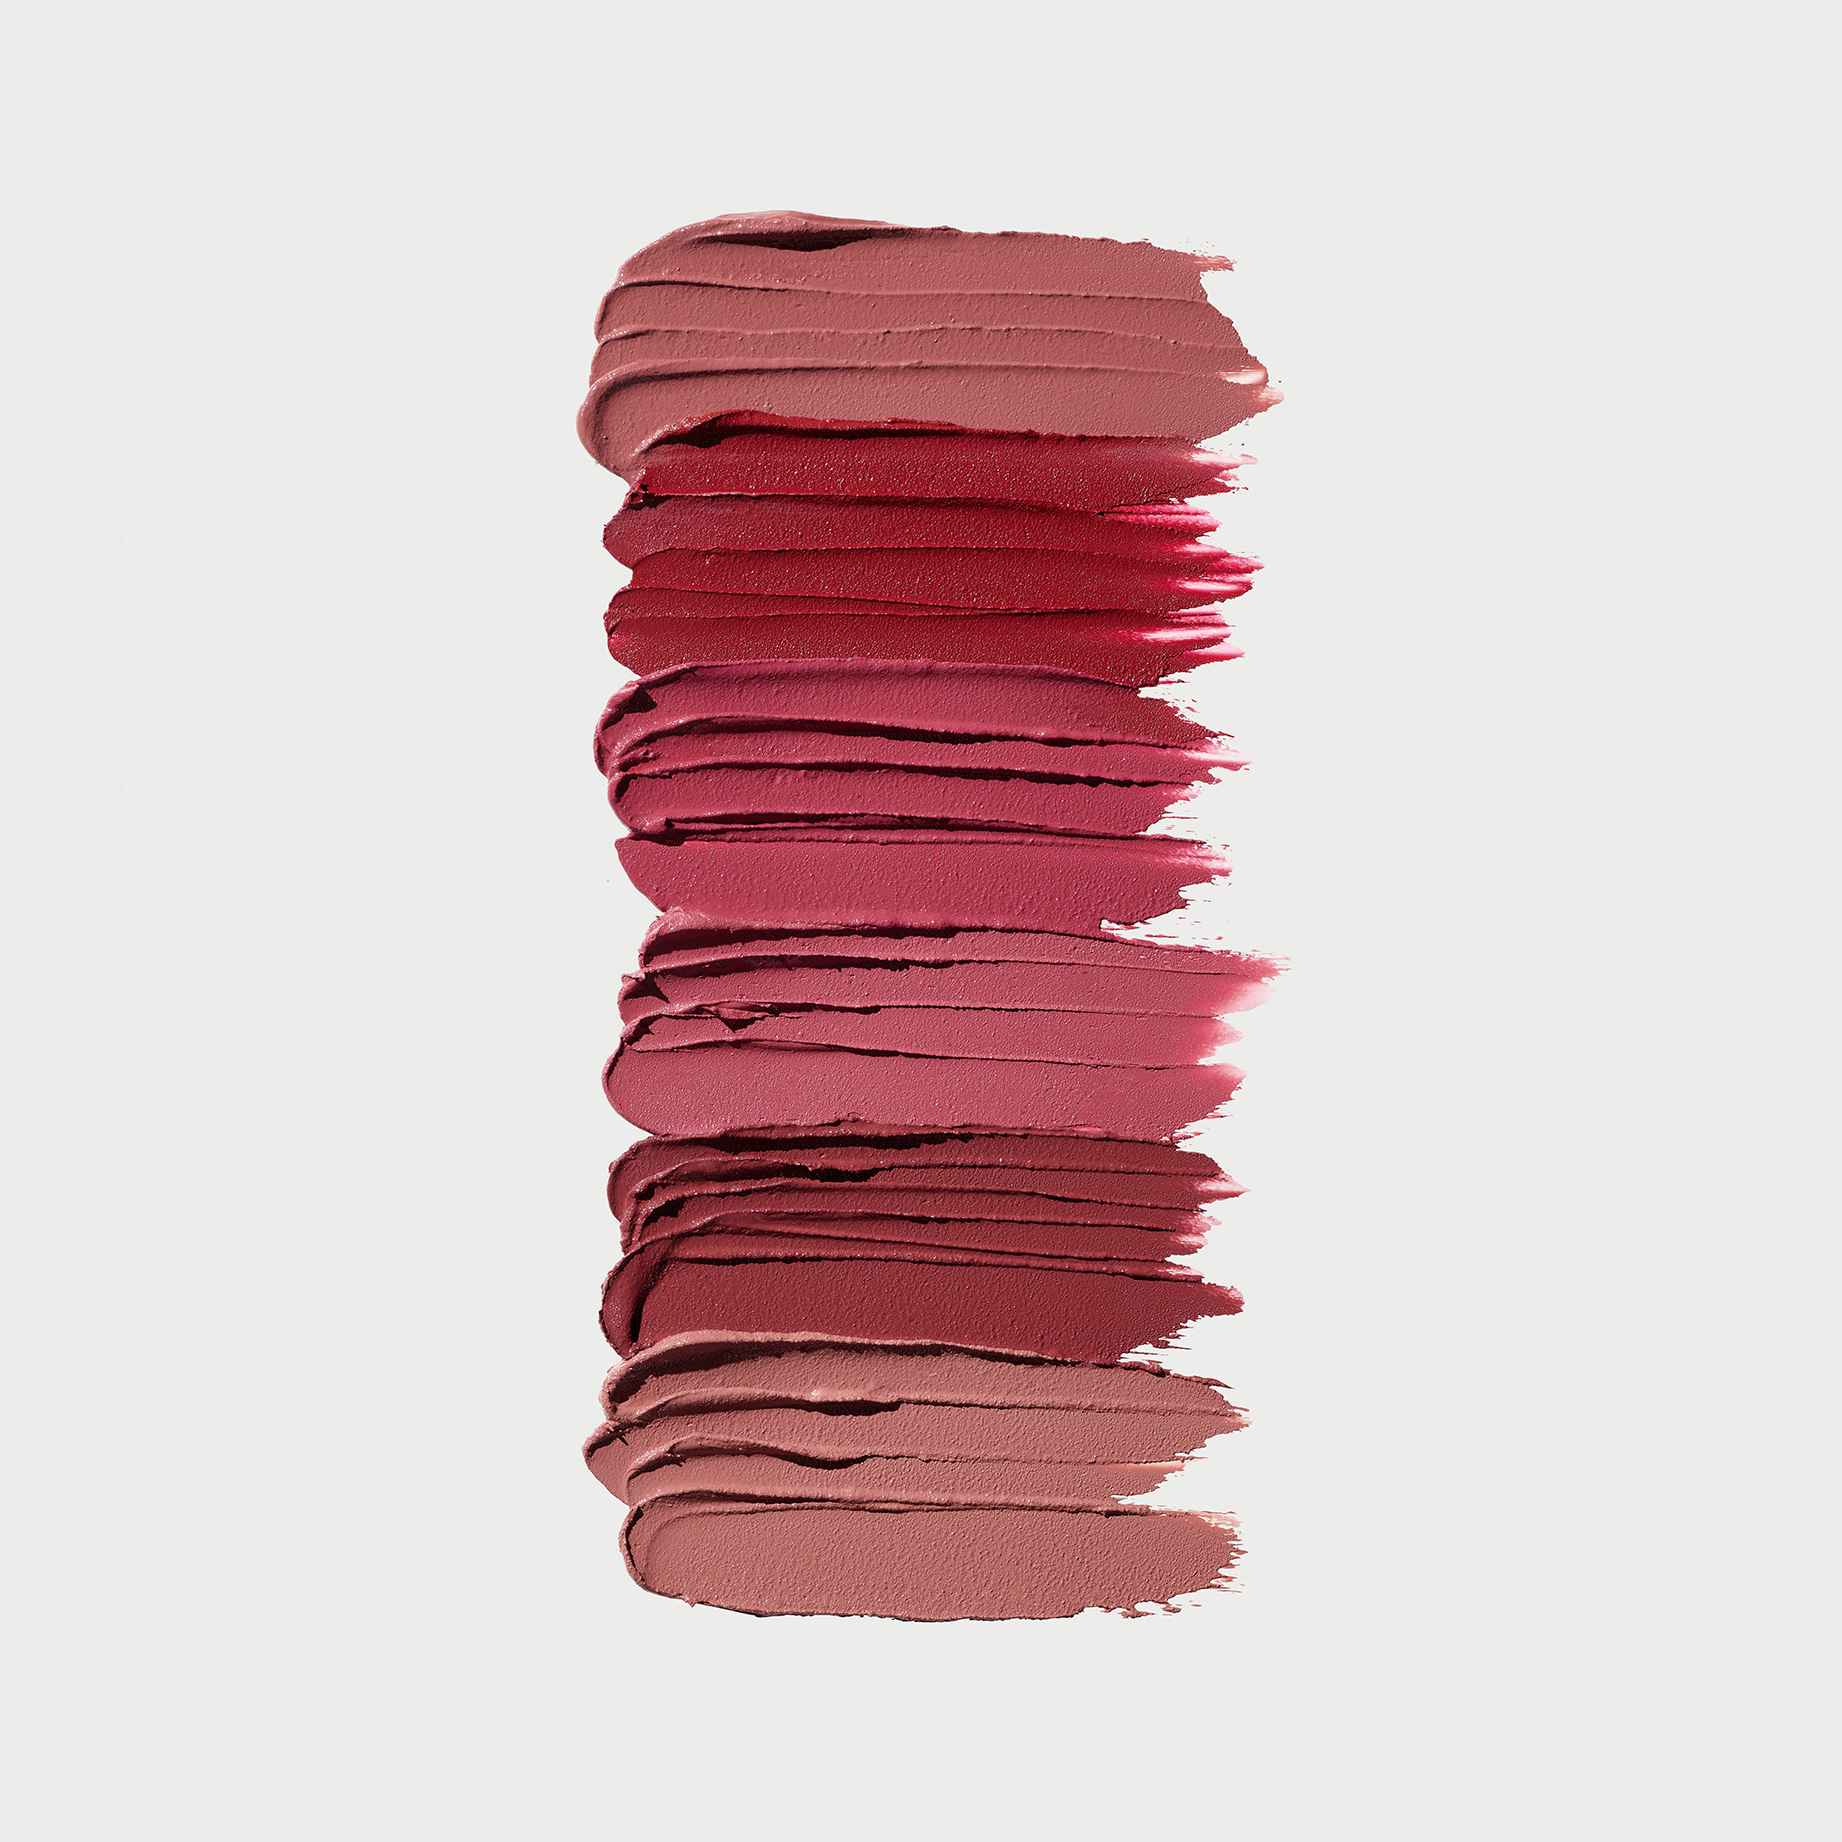 Product swatch showcasing the 6 shades of Lip Sculpt Amplifying Lip Color's smooth texture.